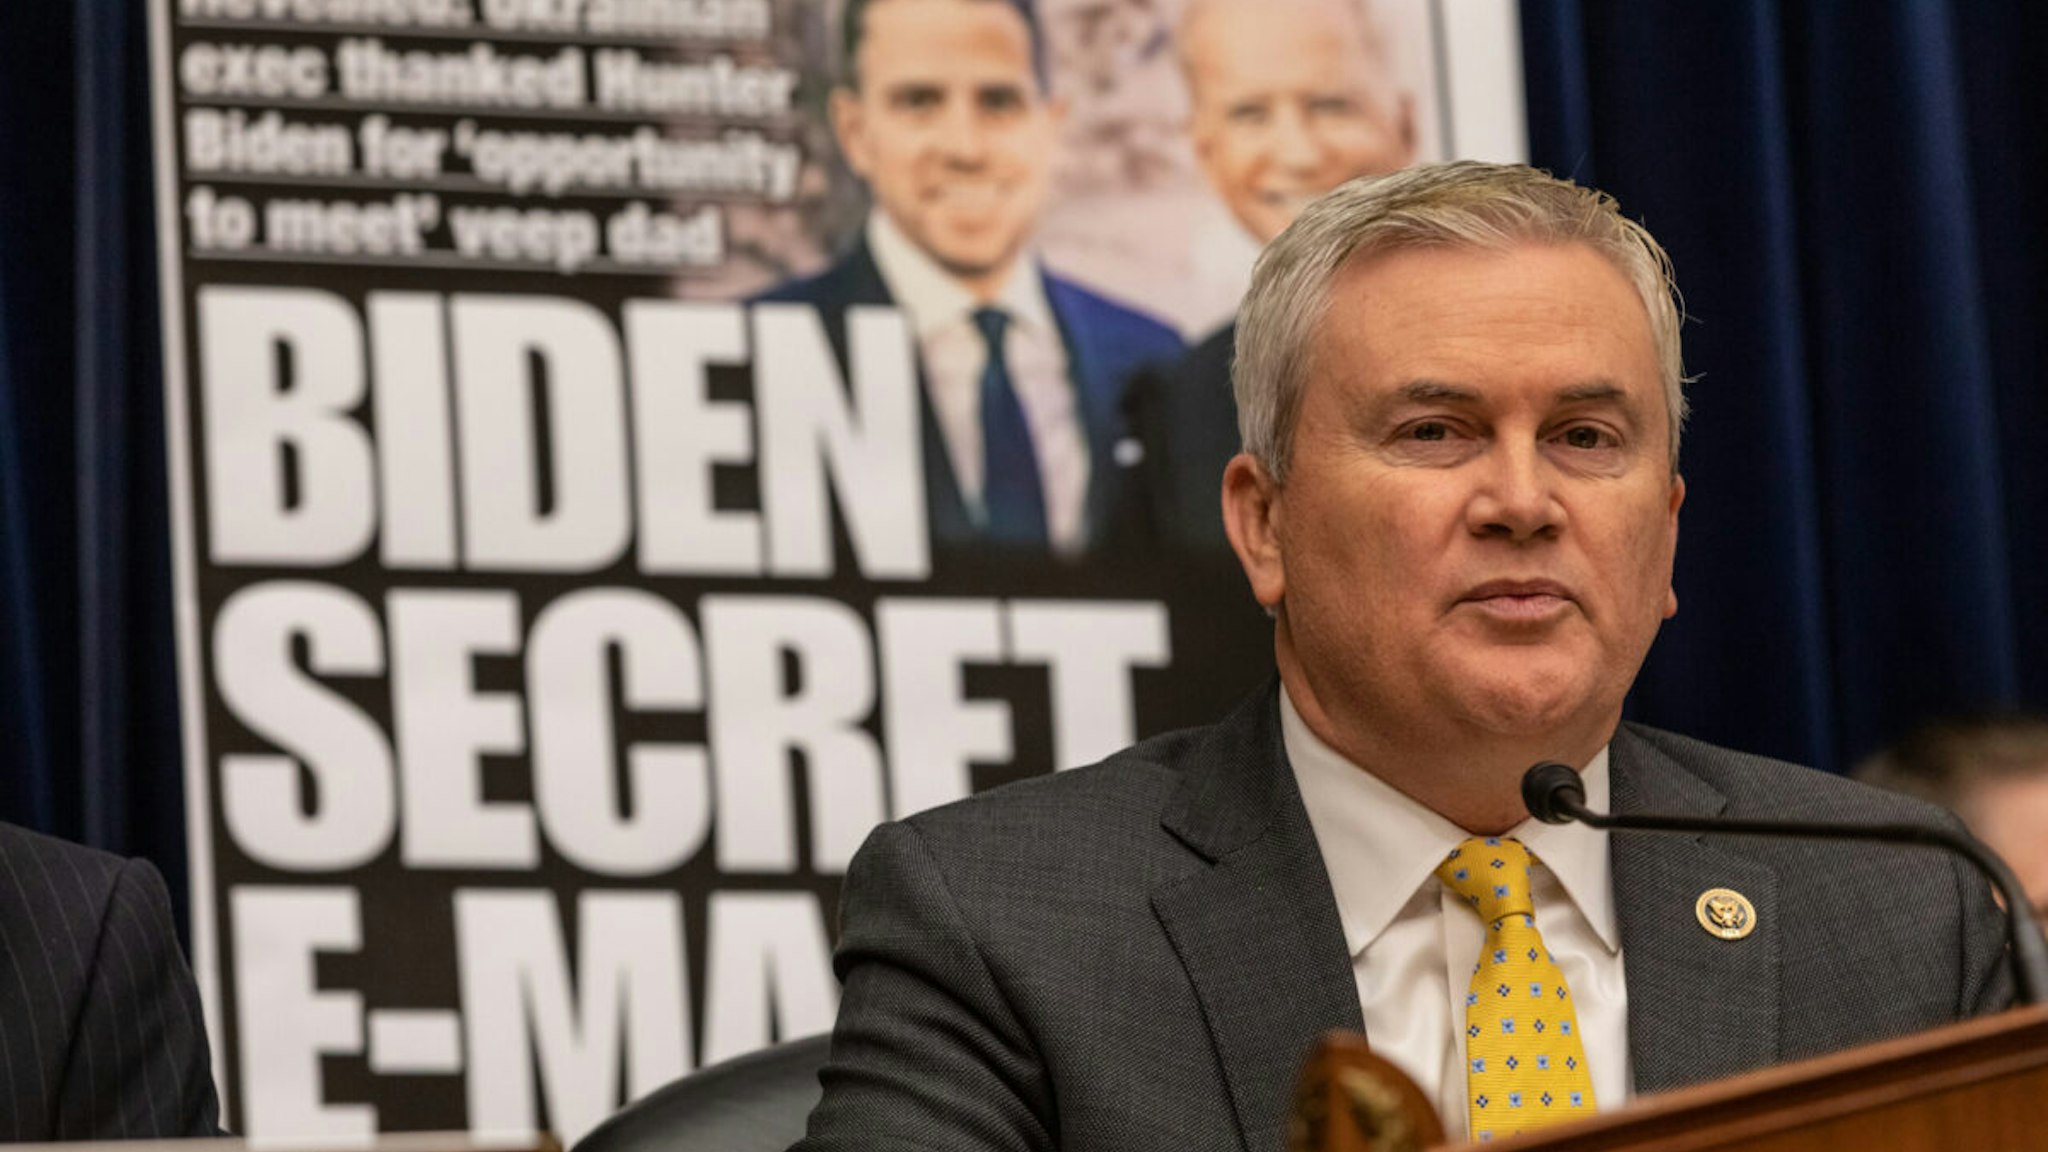 Representative James Comer, a Republican from Kentucky and chairman of the House Oversight and Accountability Committee, speaks during a hearing in Washington, DC, US, on Wednesday, Feb. 8, 2023.